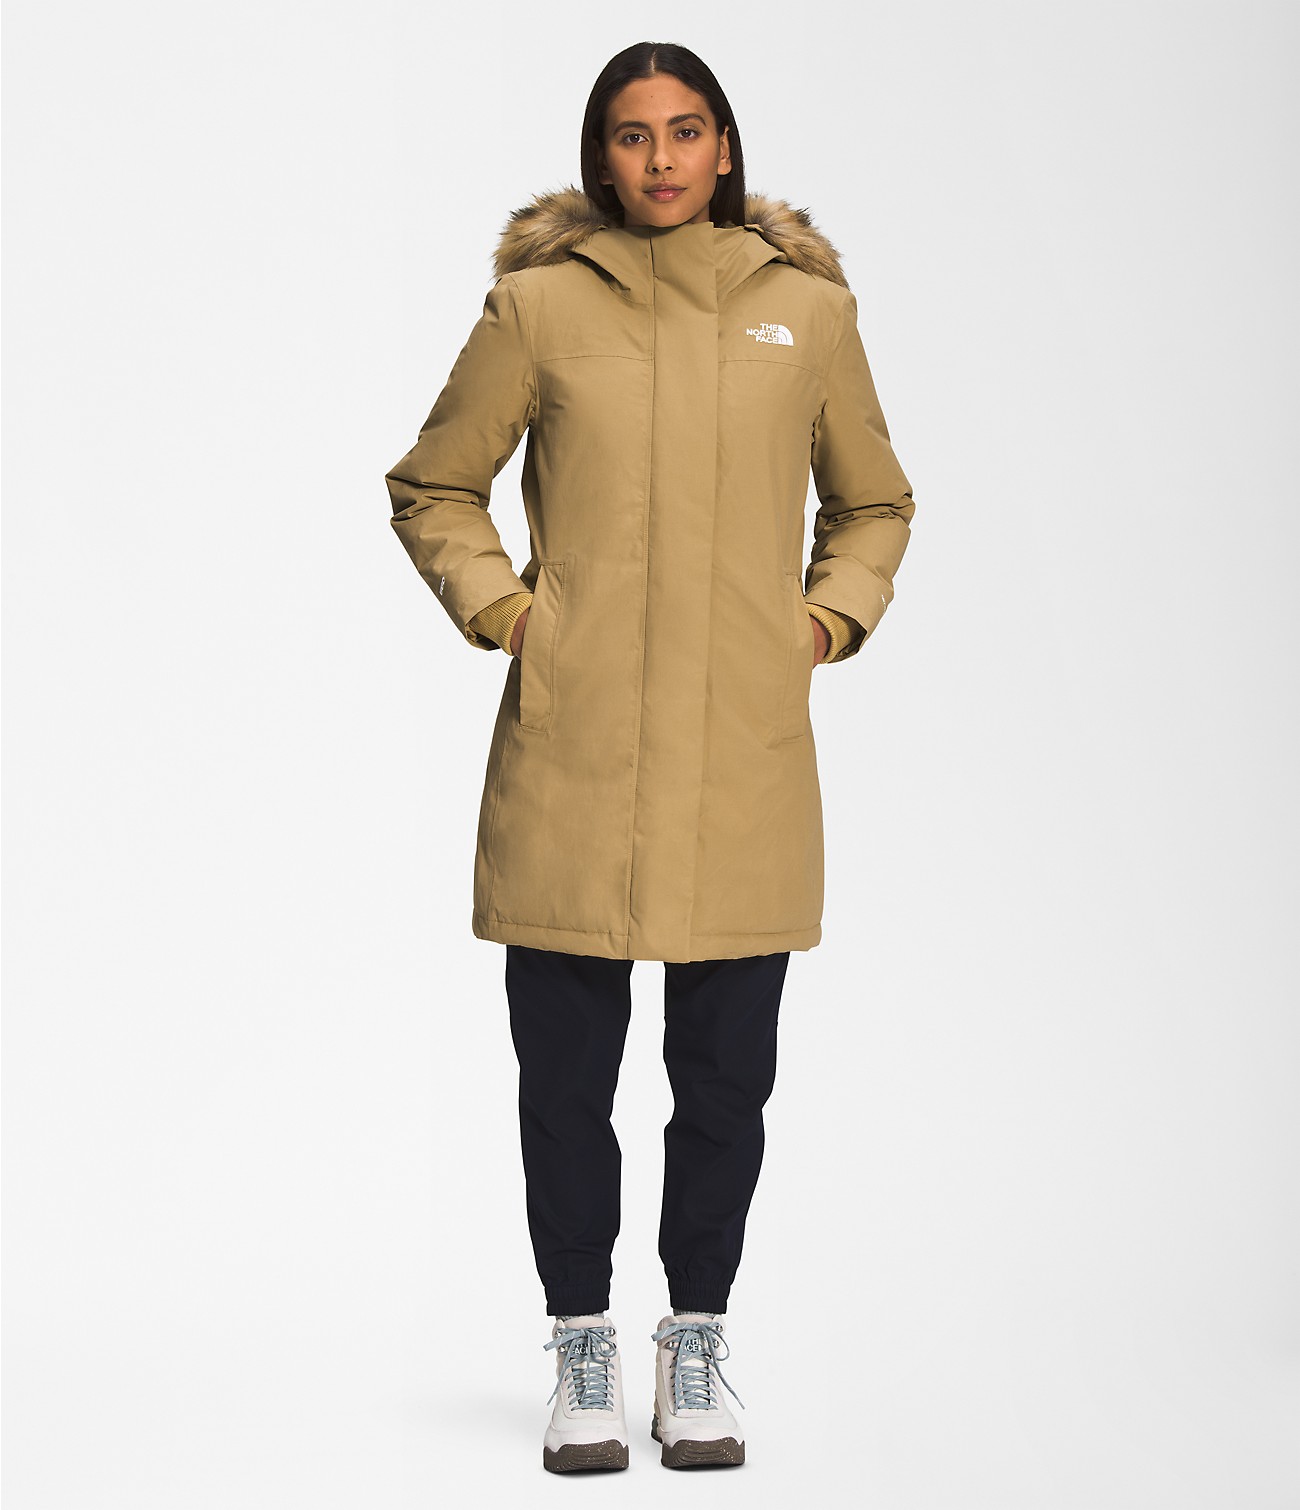 Unlock Wilderness' choice in the Superdry Vs North Face comparison, the Arctic Parka by The North Face